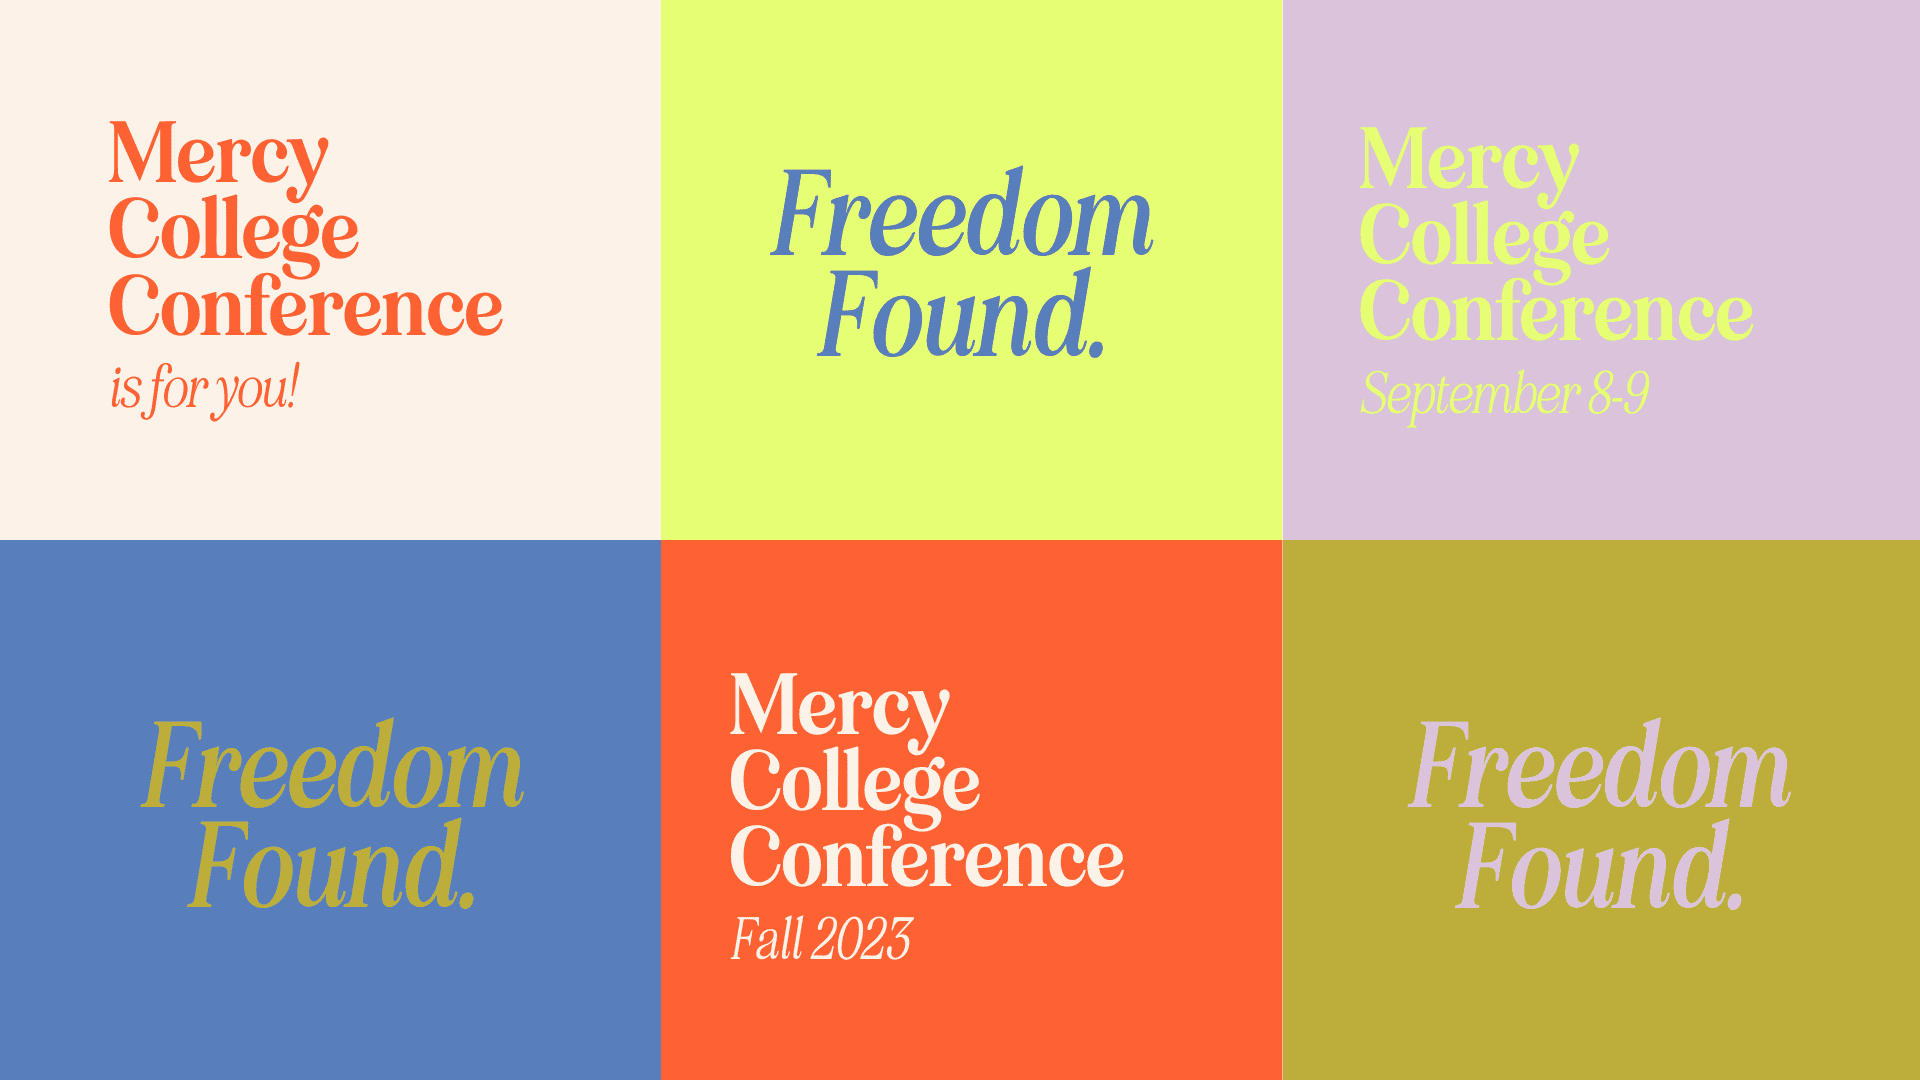 MCC - Mercy College Conference